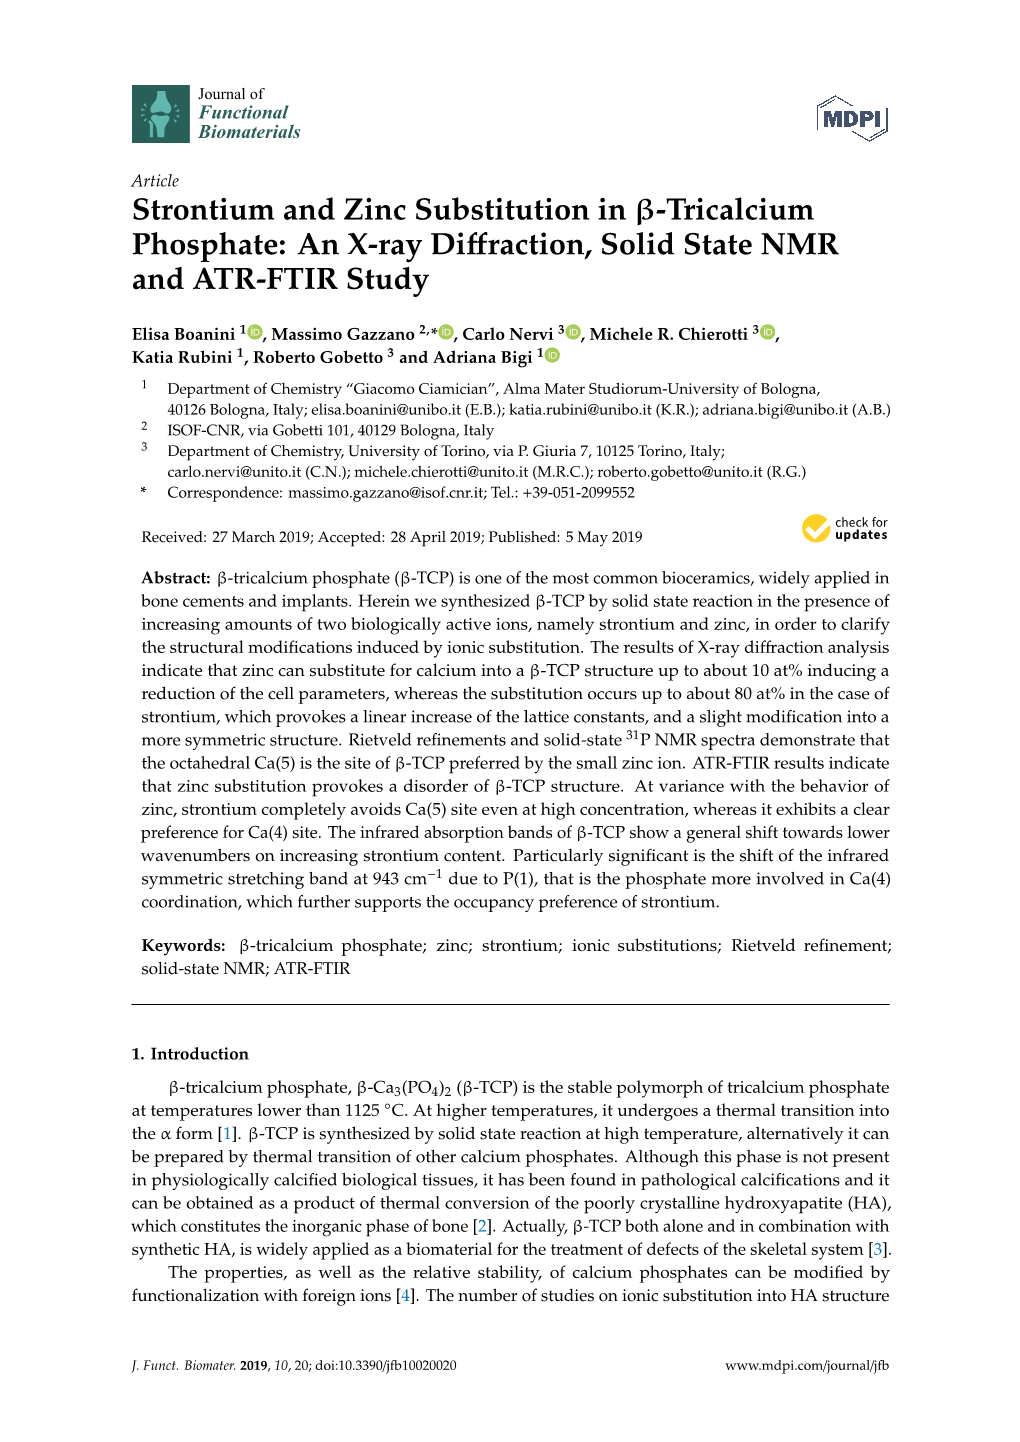 Tricalcium Phosphate: an X-Ray Diﬀraction, Solid State NMR and ATR-FTIR Study